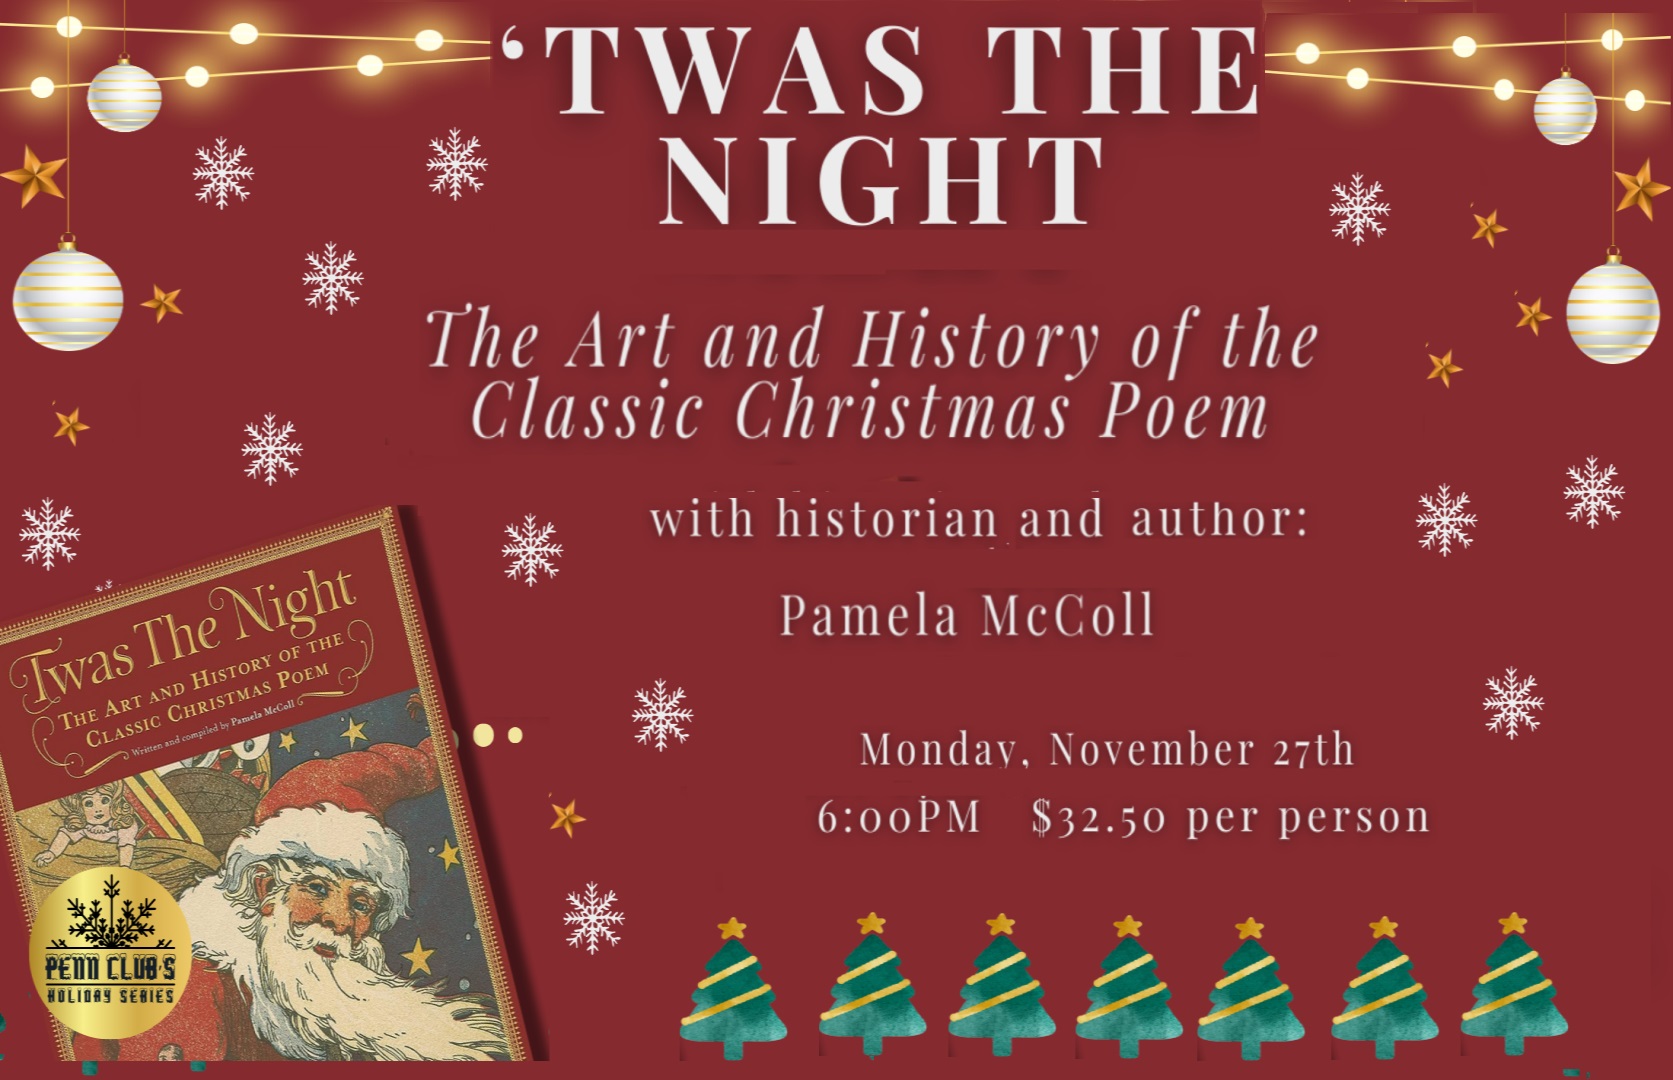 Come join us for a bicentennial celebration and book signing!